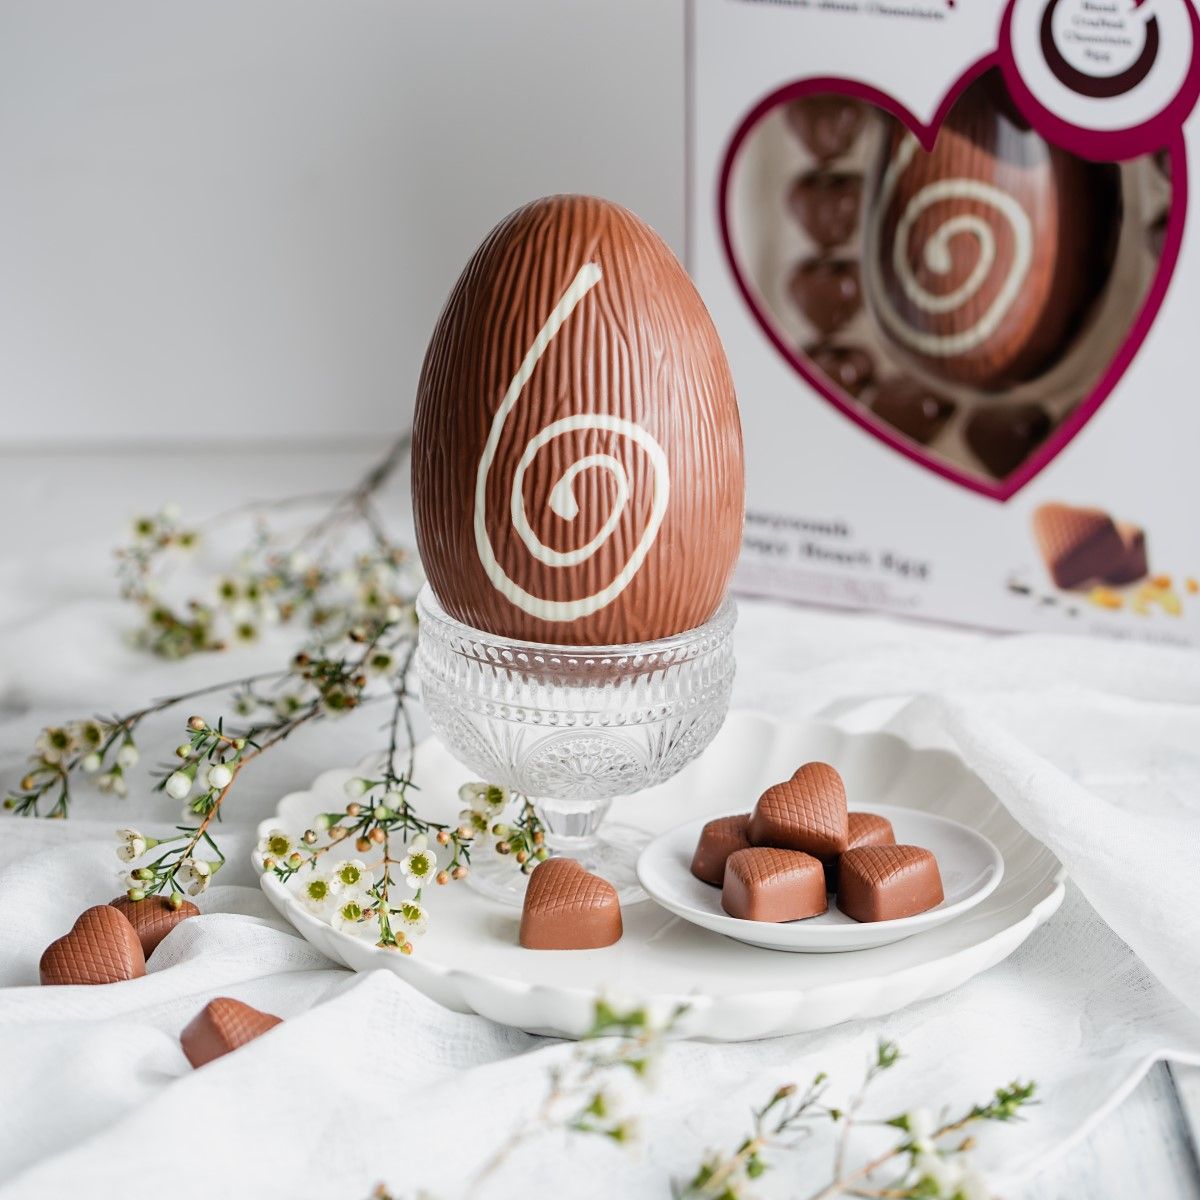 Chocolate Easter Eggs & Easter Chocolate Gifts Ireland